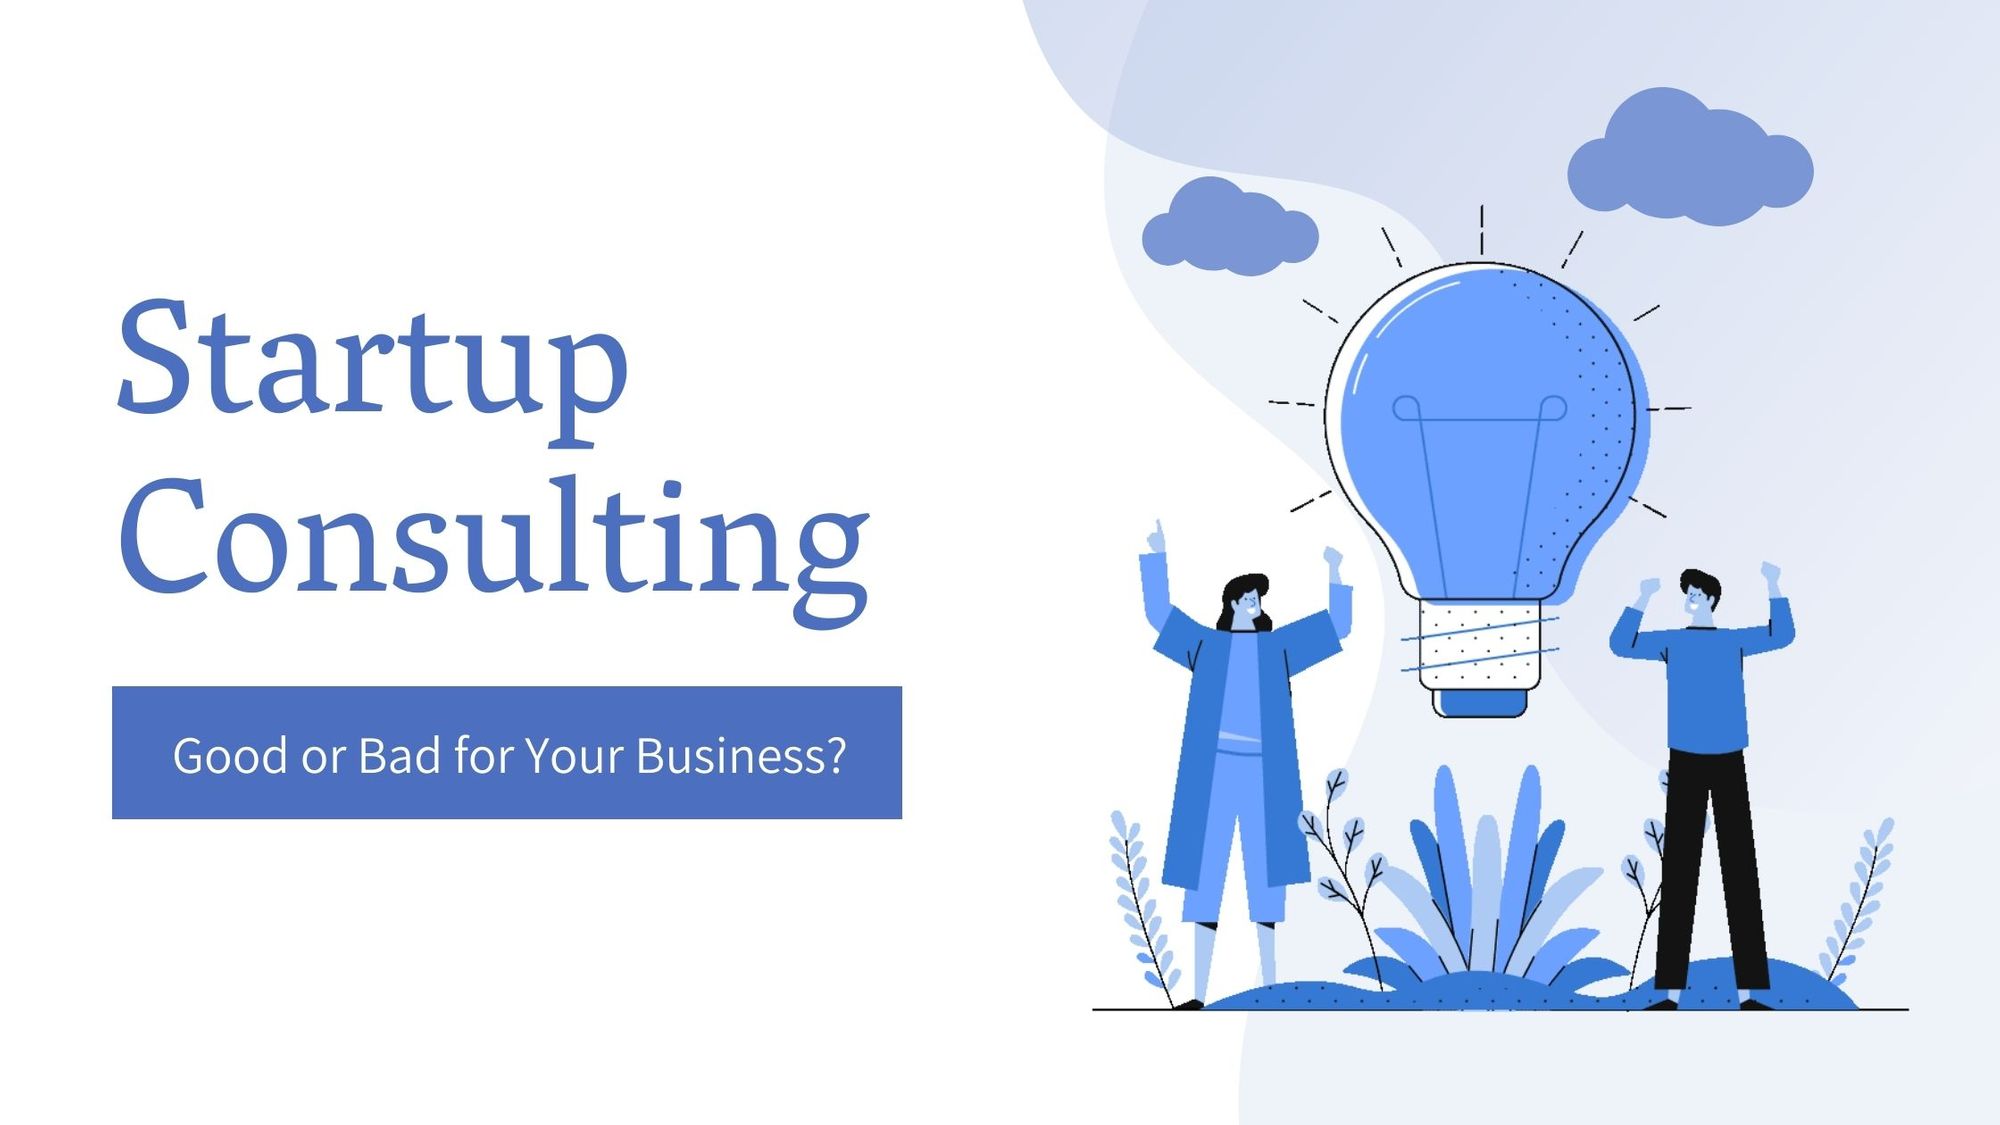 Startup Consulting - How to Maximize Results with Consultants for Business